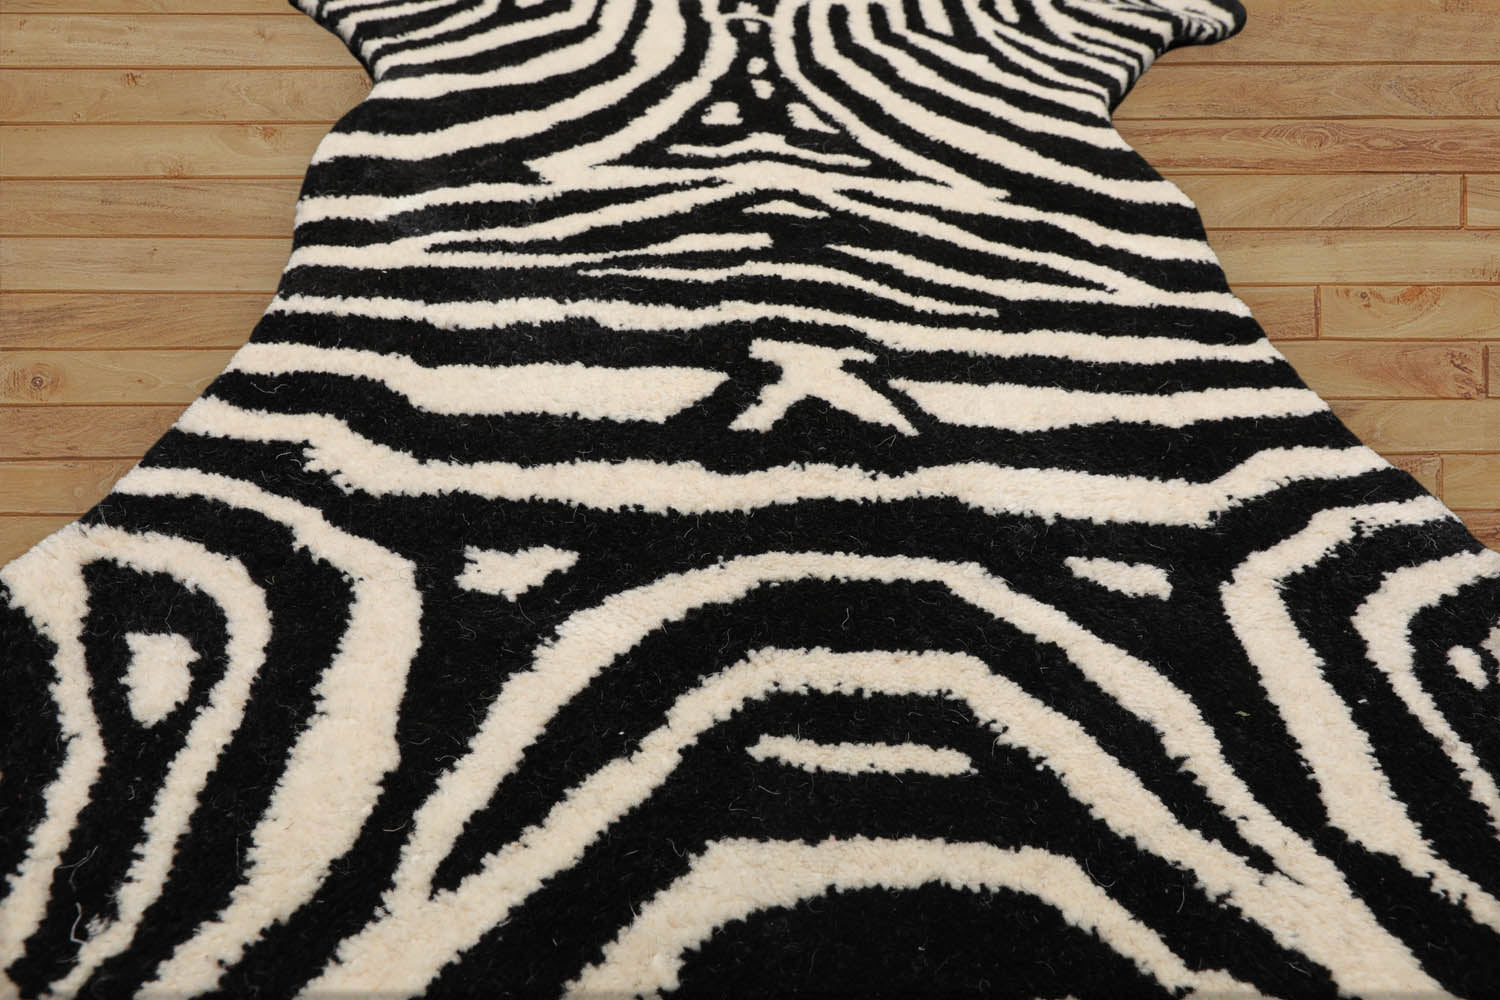 Hillingdon 3x5 Hand Tufted Hand Made 100% Wool Novelty Oriental Area Rug Black, White Color